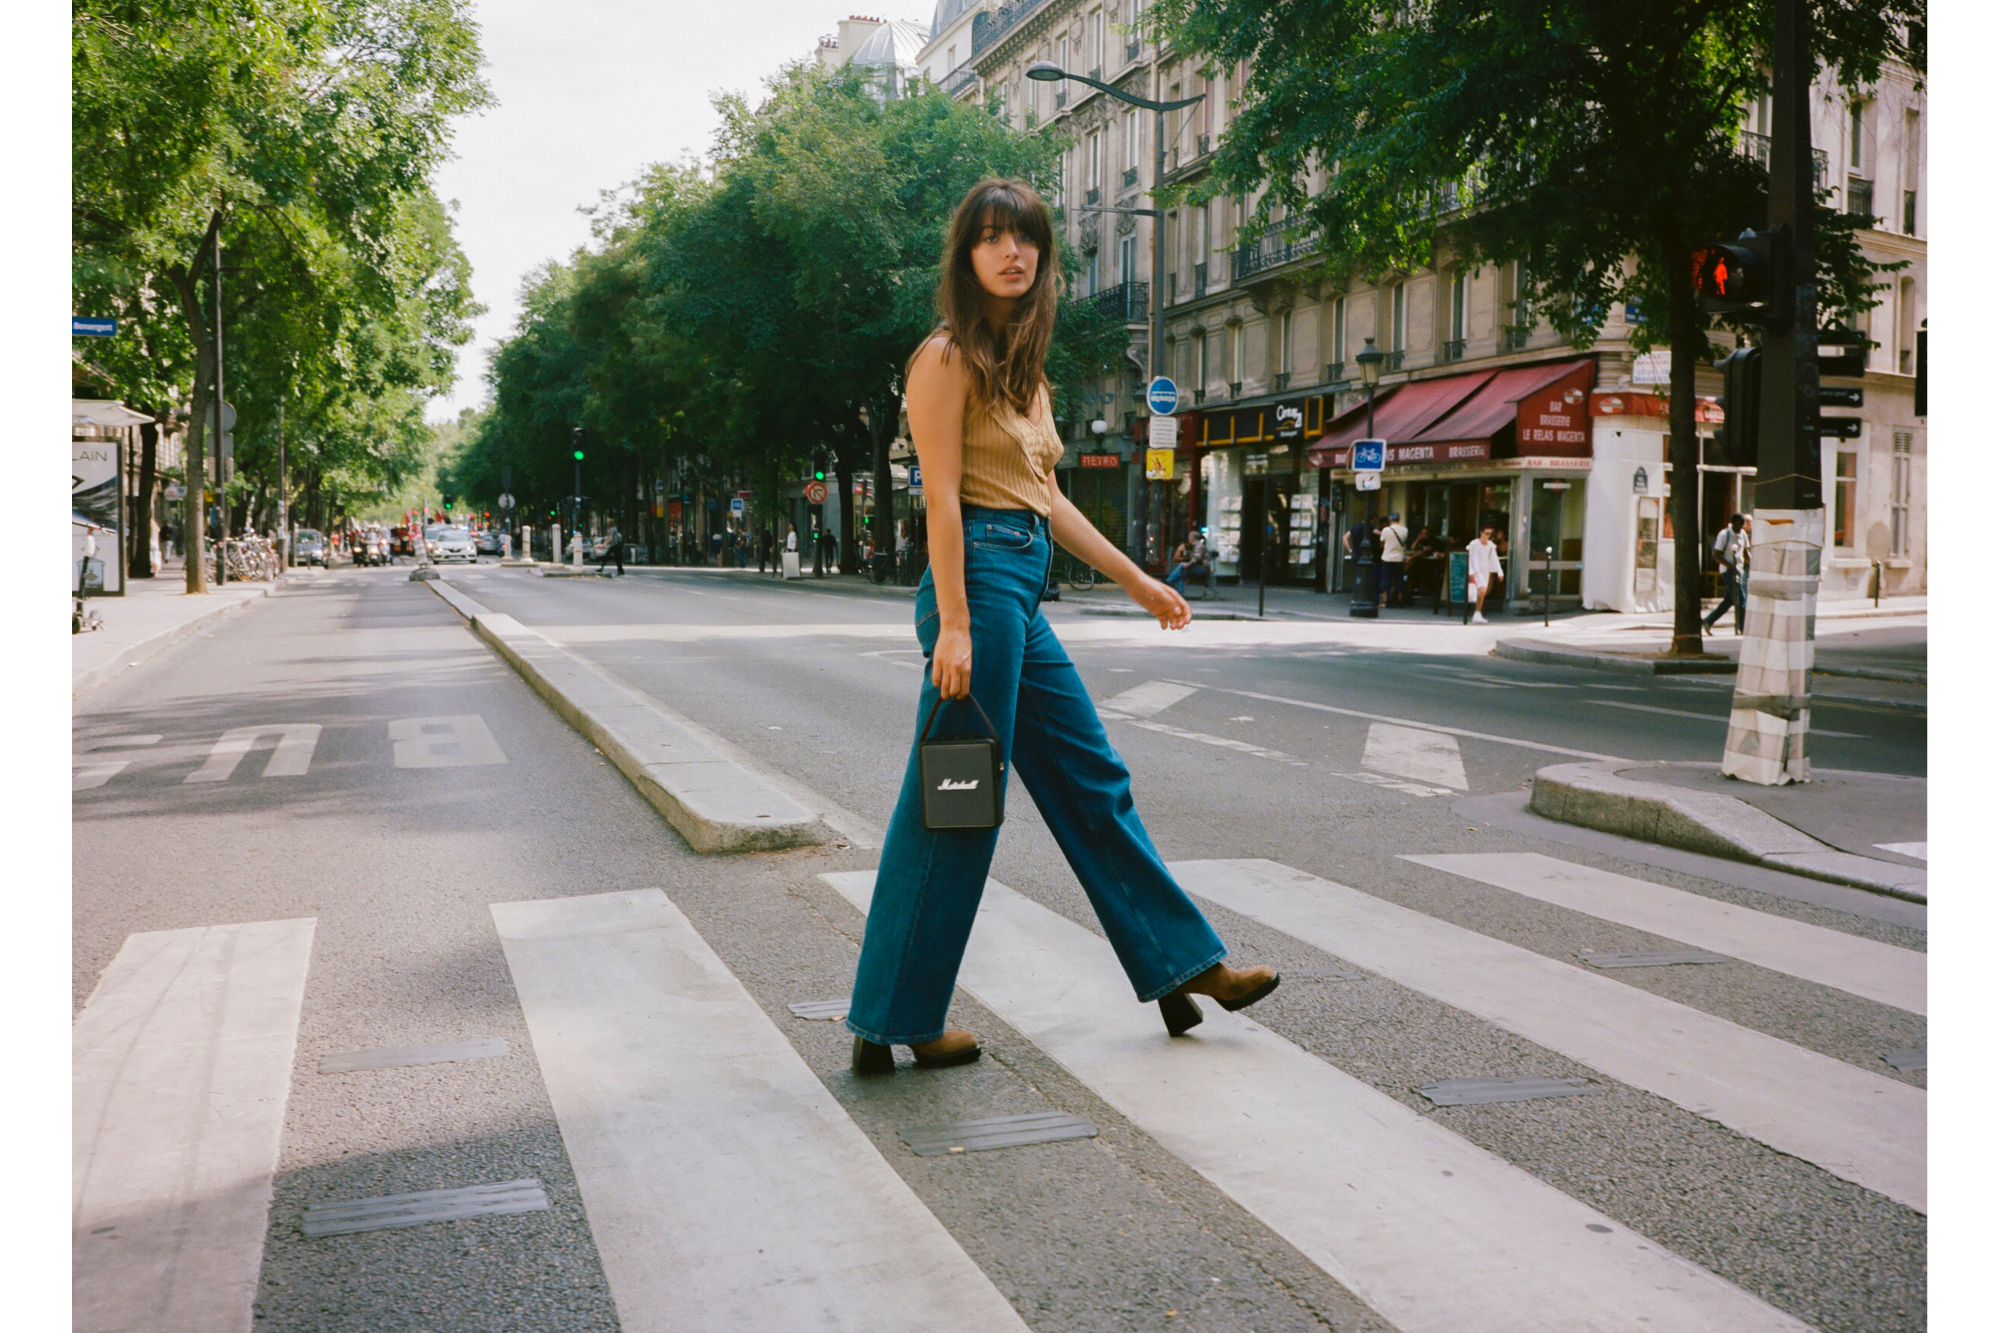 MOYNAT - Tommy's take on Paris : Louise Follain carries a